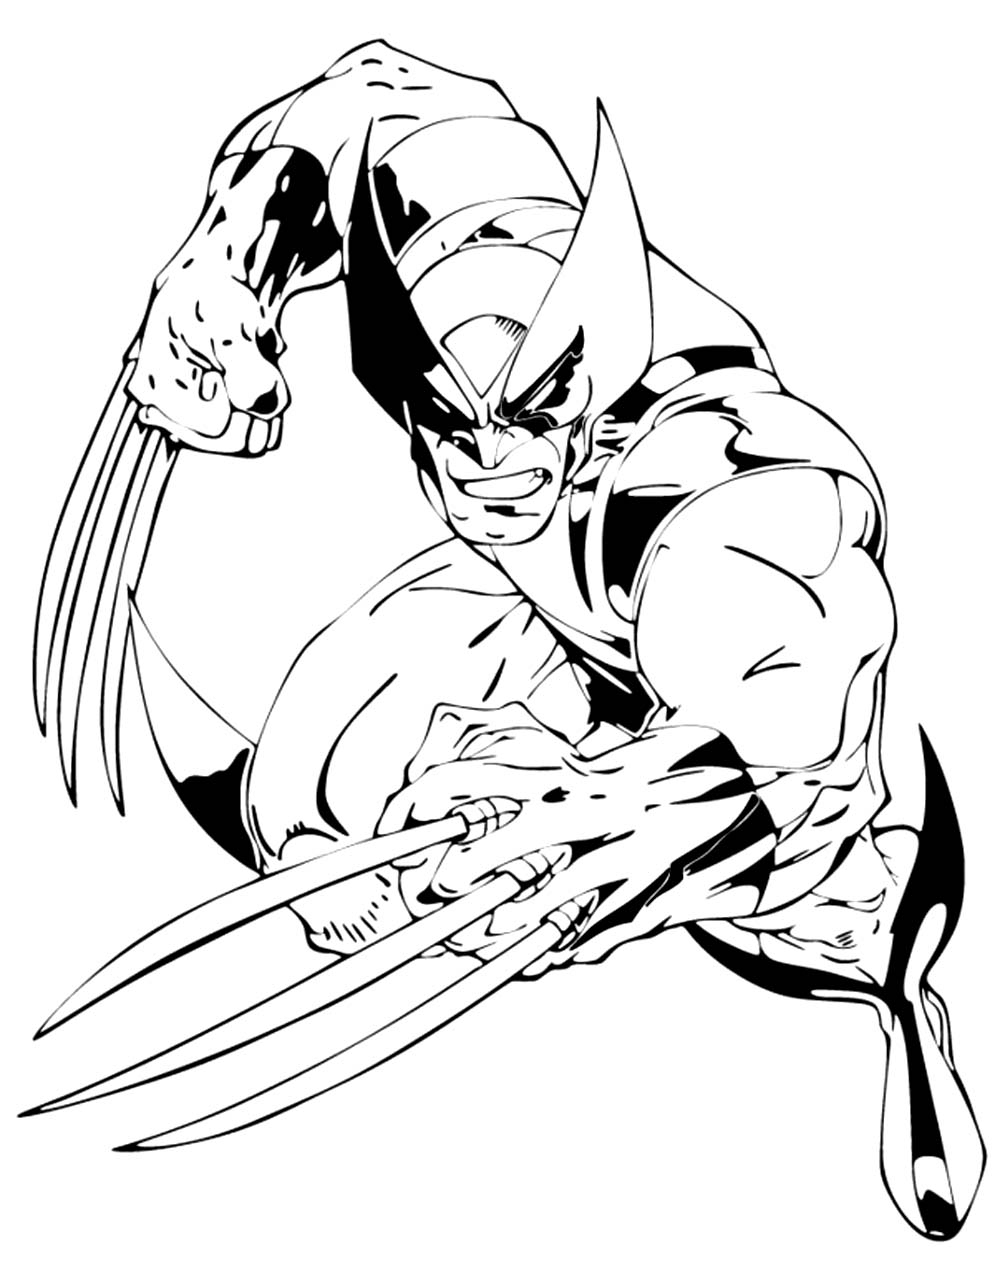 Printable Wolverine Coloring Pages   ColoringMe.com